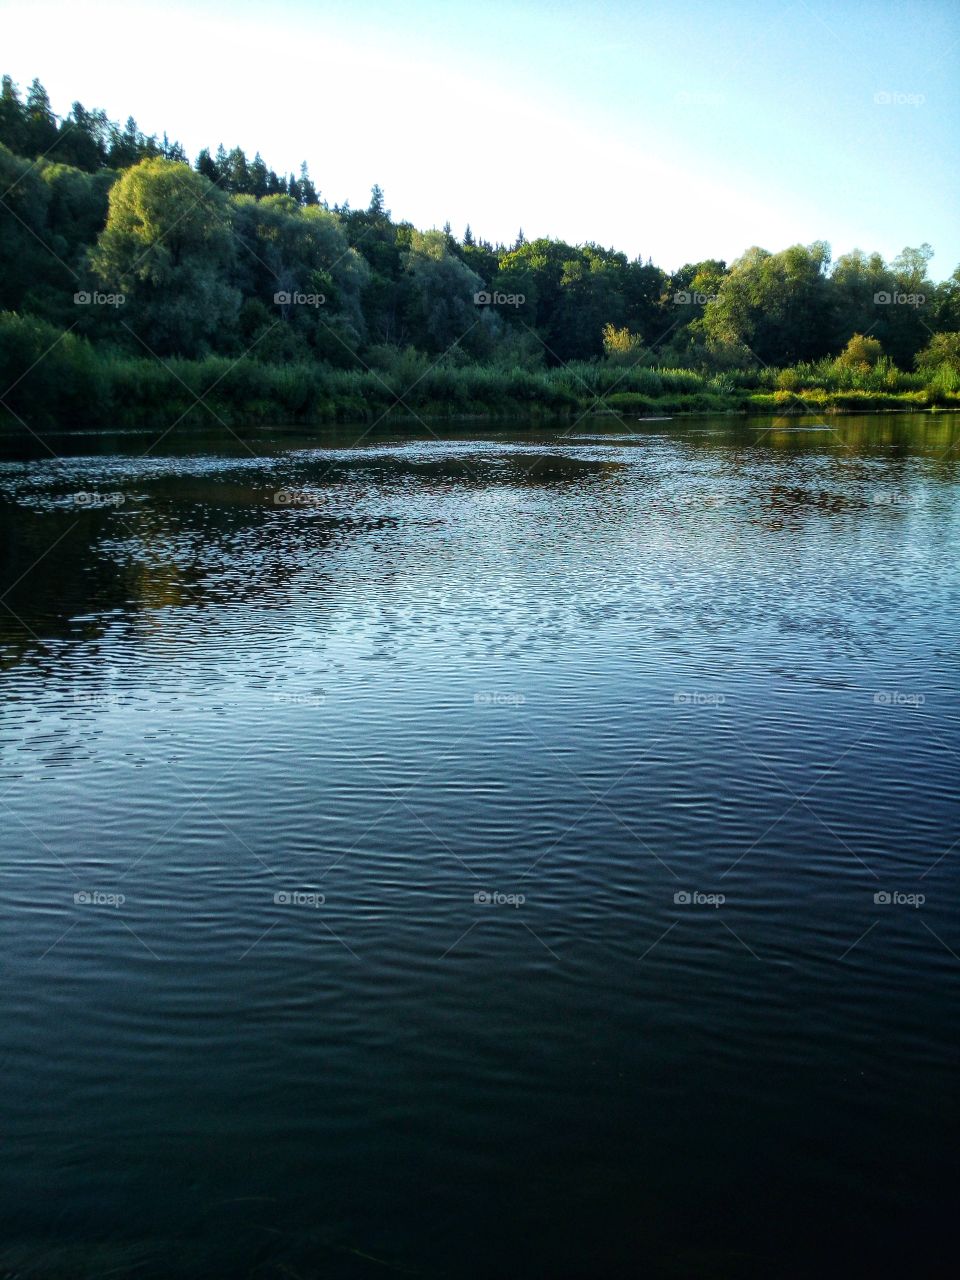 River. Summertime. Evening. Peace. Life. Breathe the Life. Relax.